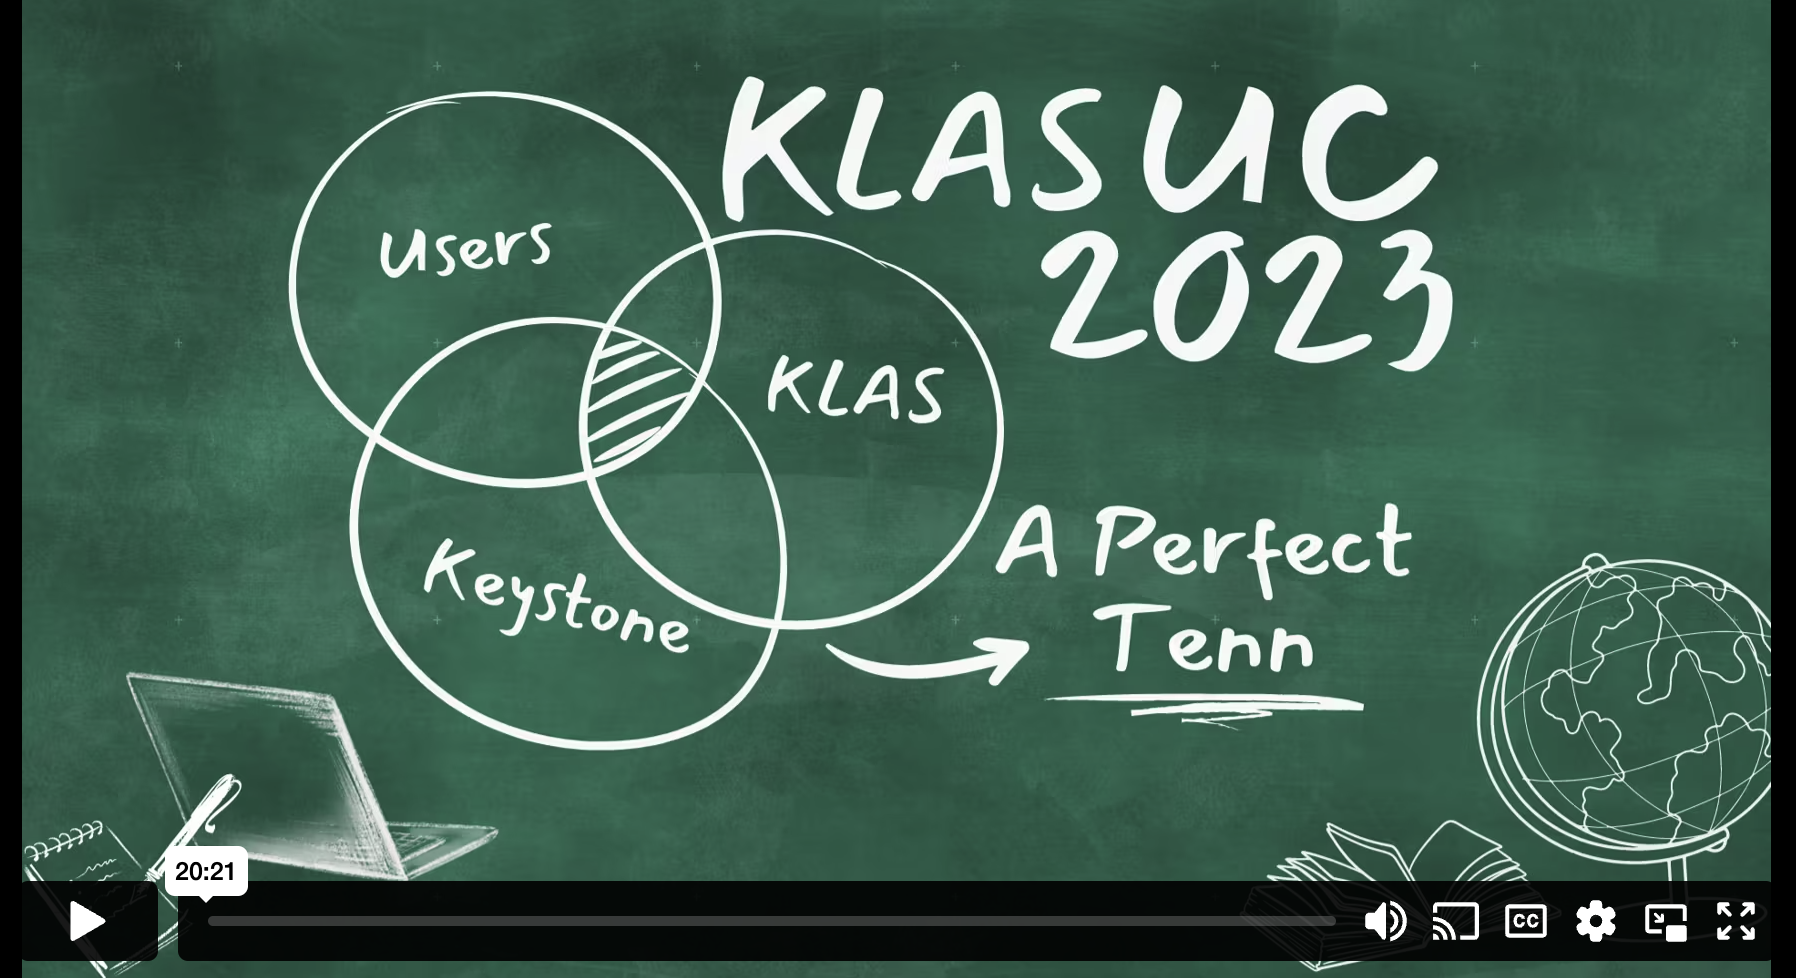 Screenshot of a video player. The initial frame is the KLAS UC2023 promo image.